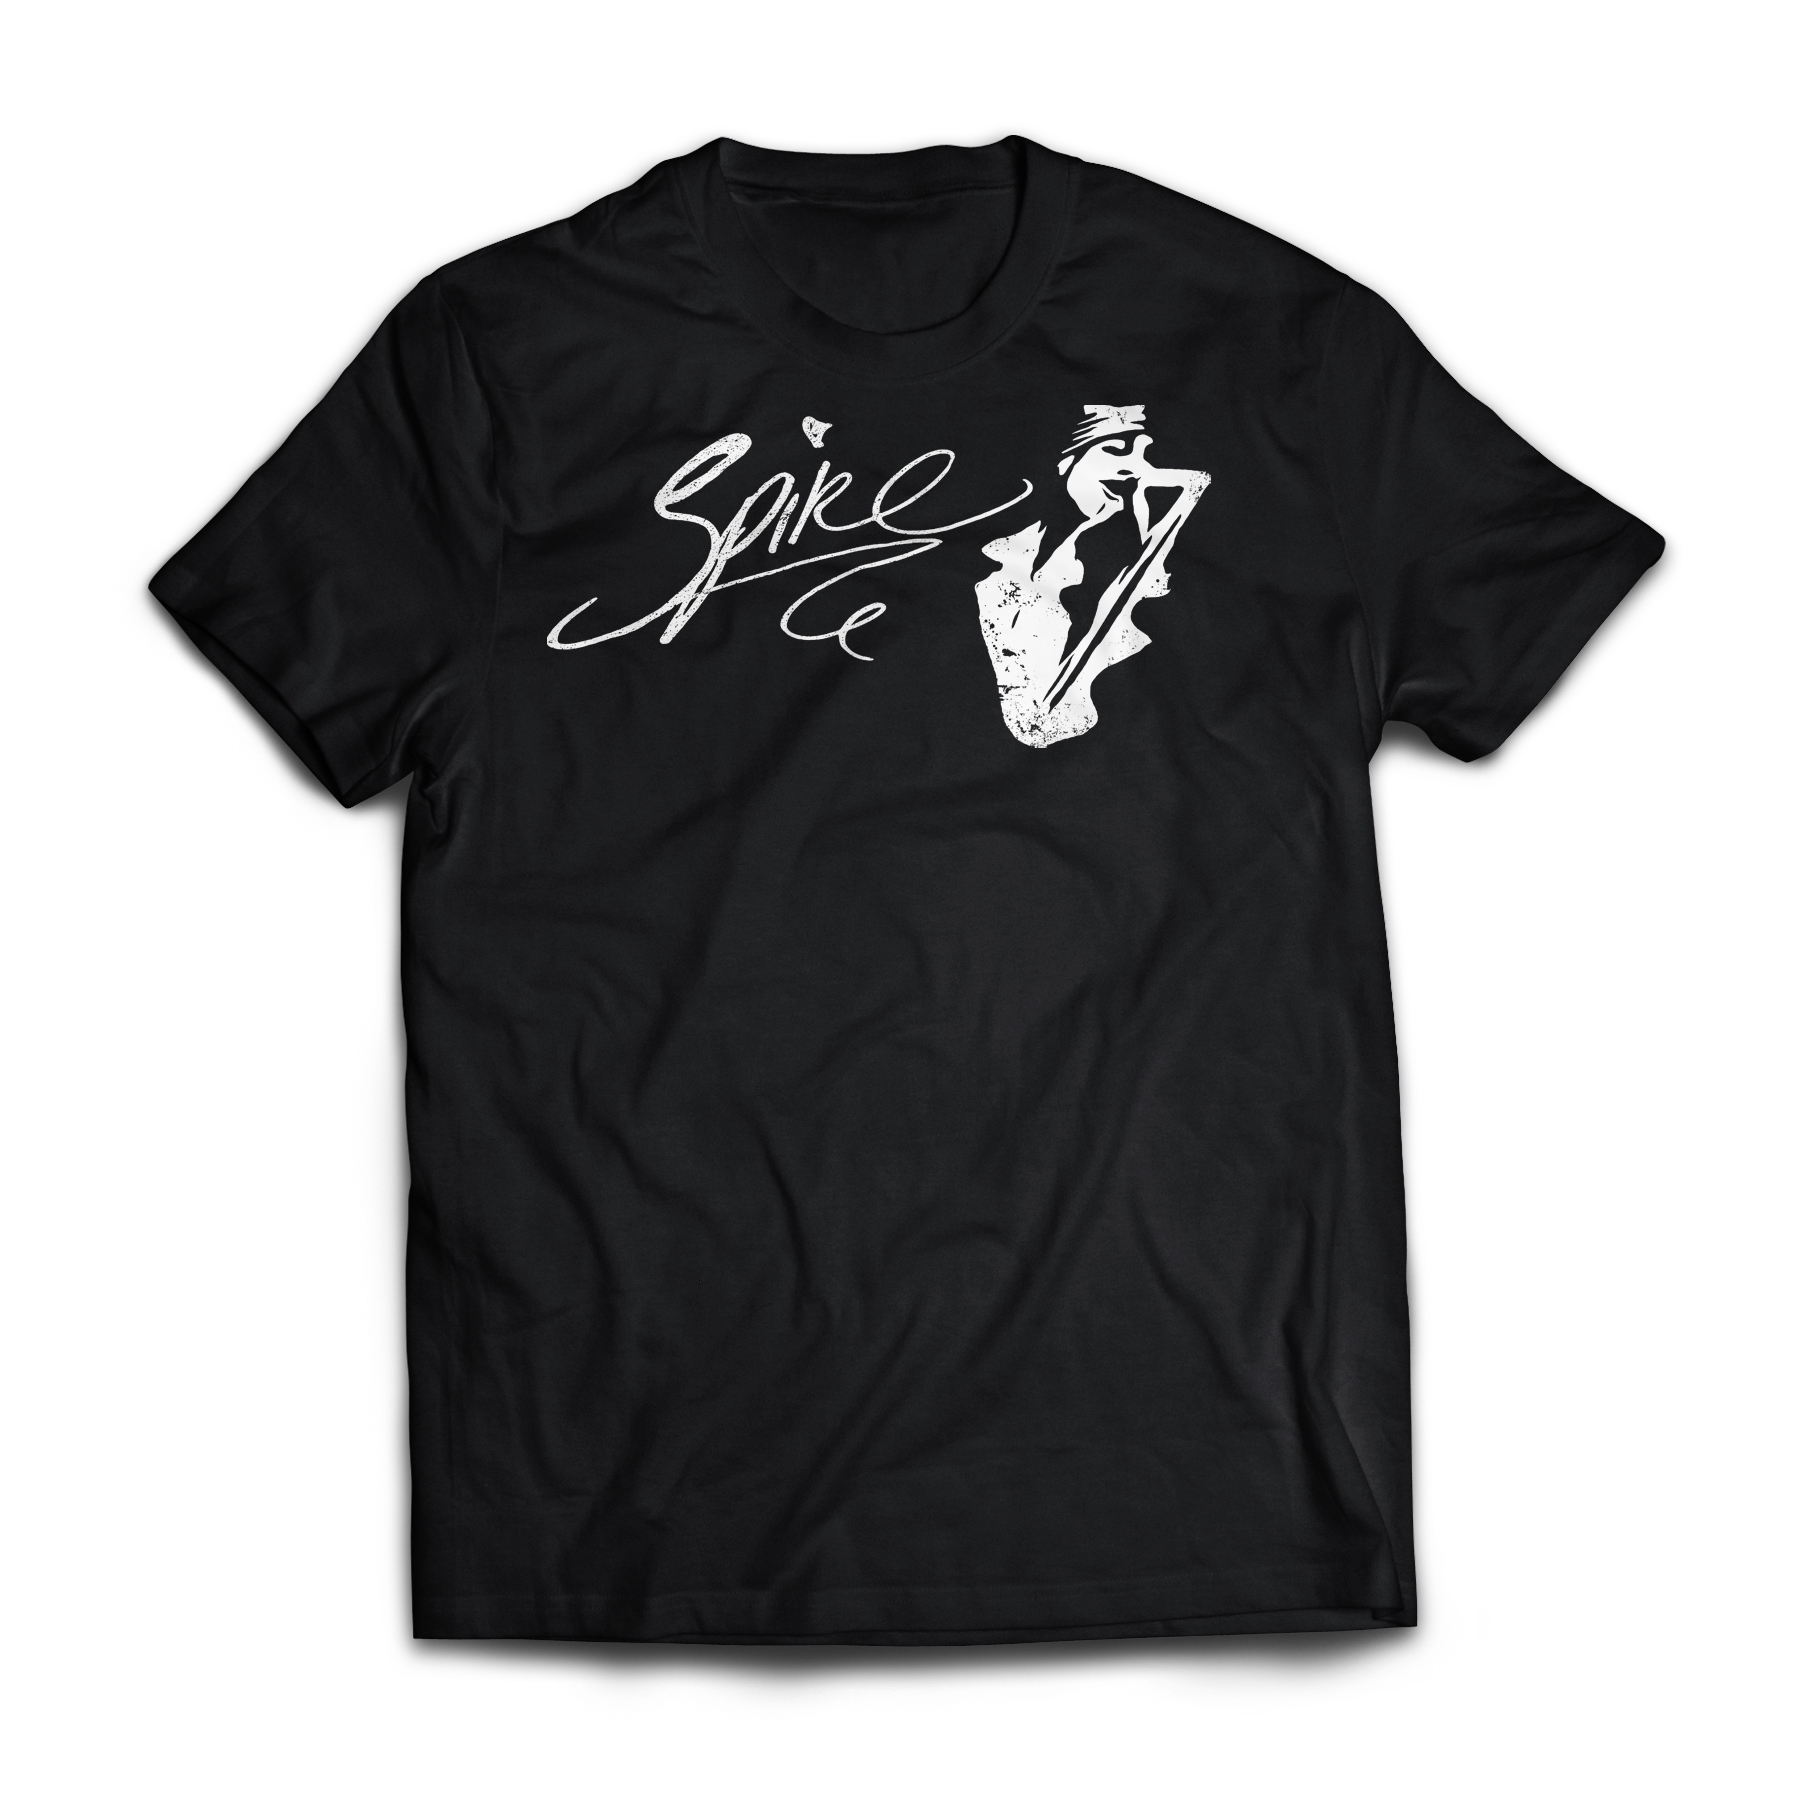 Men's t-shirt, black with white graphic of spike singing and logo across the chest